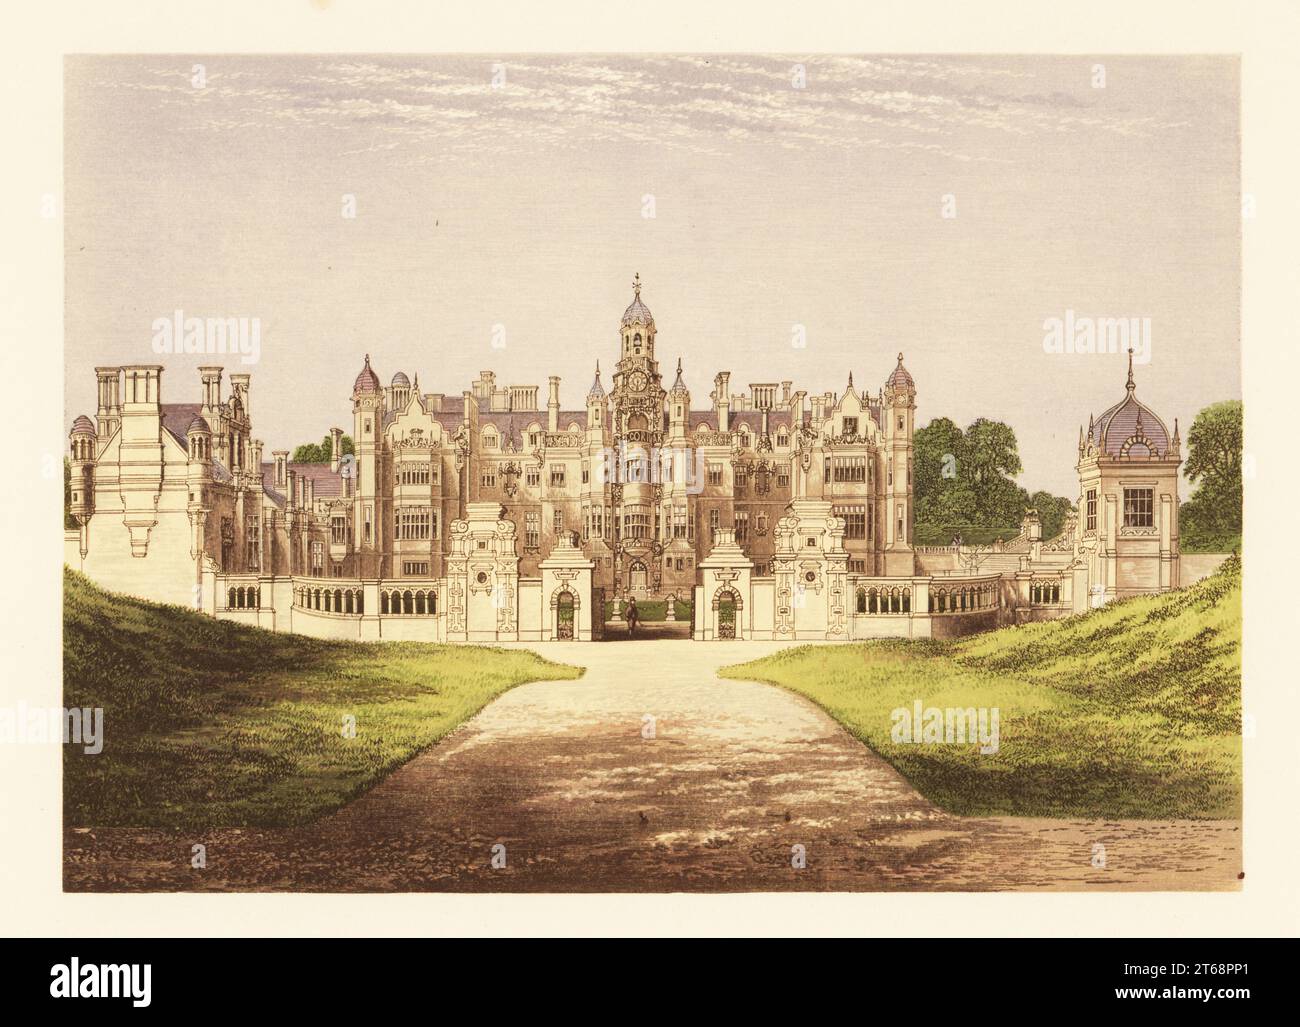 Harlaxton Manor, Lincolnshire, England. Jacobean- and Elizabethan-style house with symmetrical Baroque massing built 1832-54 by architect Anthony Salvin and William Burn for coal baron Gregory Gregory (Gregory Williams). Colour woodblock by Benjamin Fawcett in the Baxter process of an illustration by Alexander Francis Lydon from Reverend Francis Orpen Morriss Picturesque Views of the Seats of Noblemen and Gentlemen of Great Britain and Ireland, William Mackenzie, London, 1880. Stock Photo